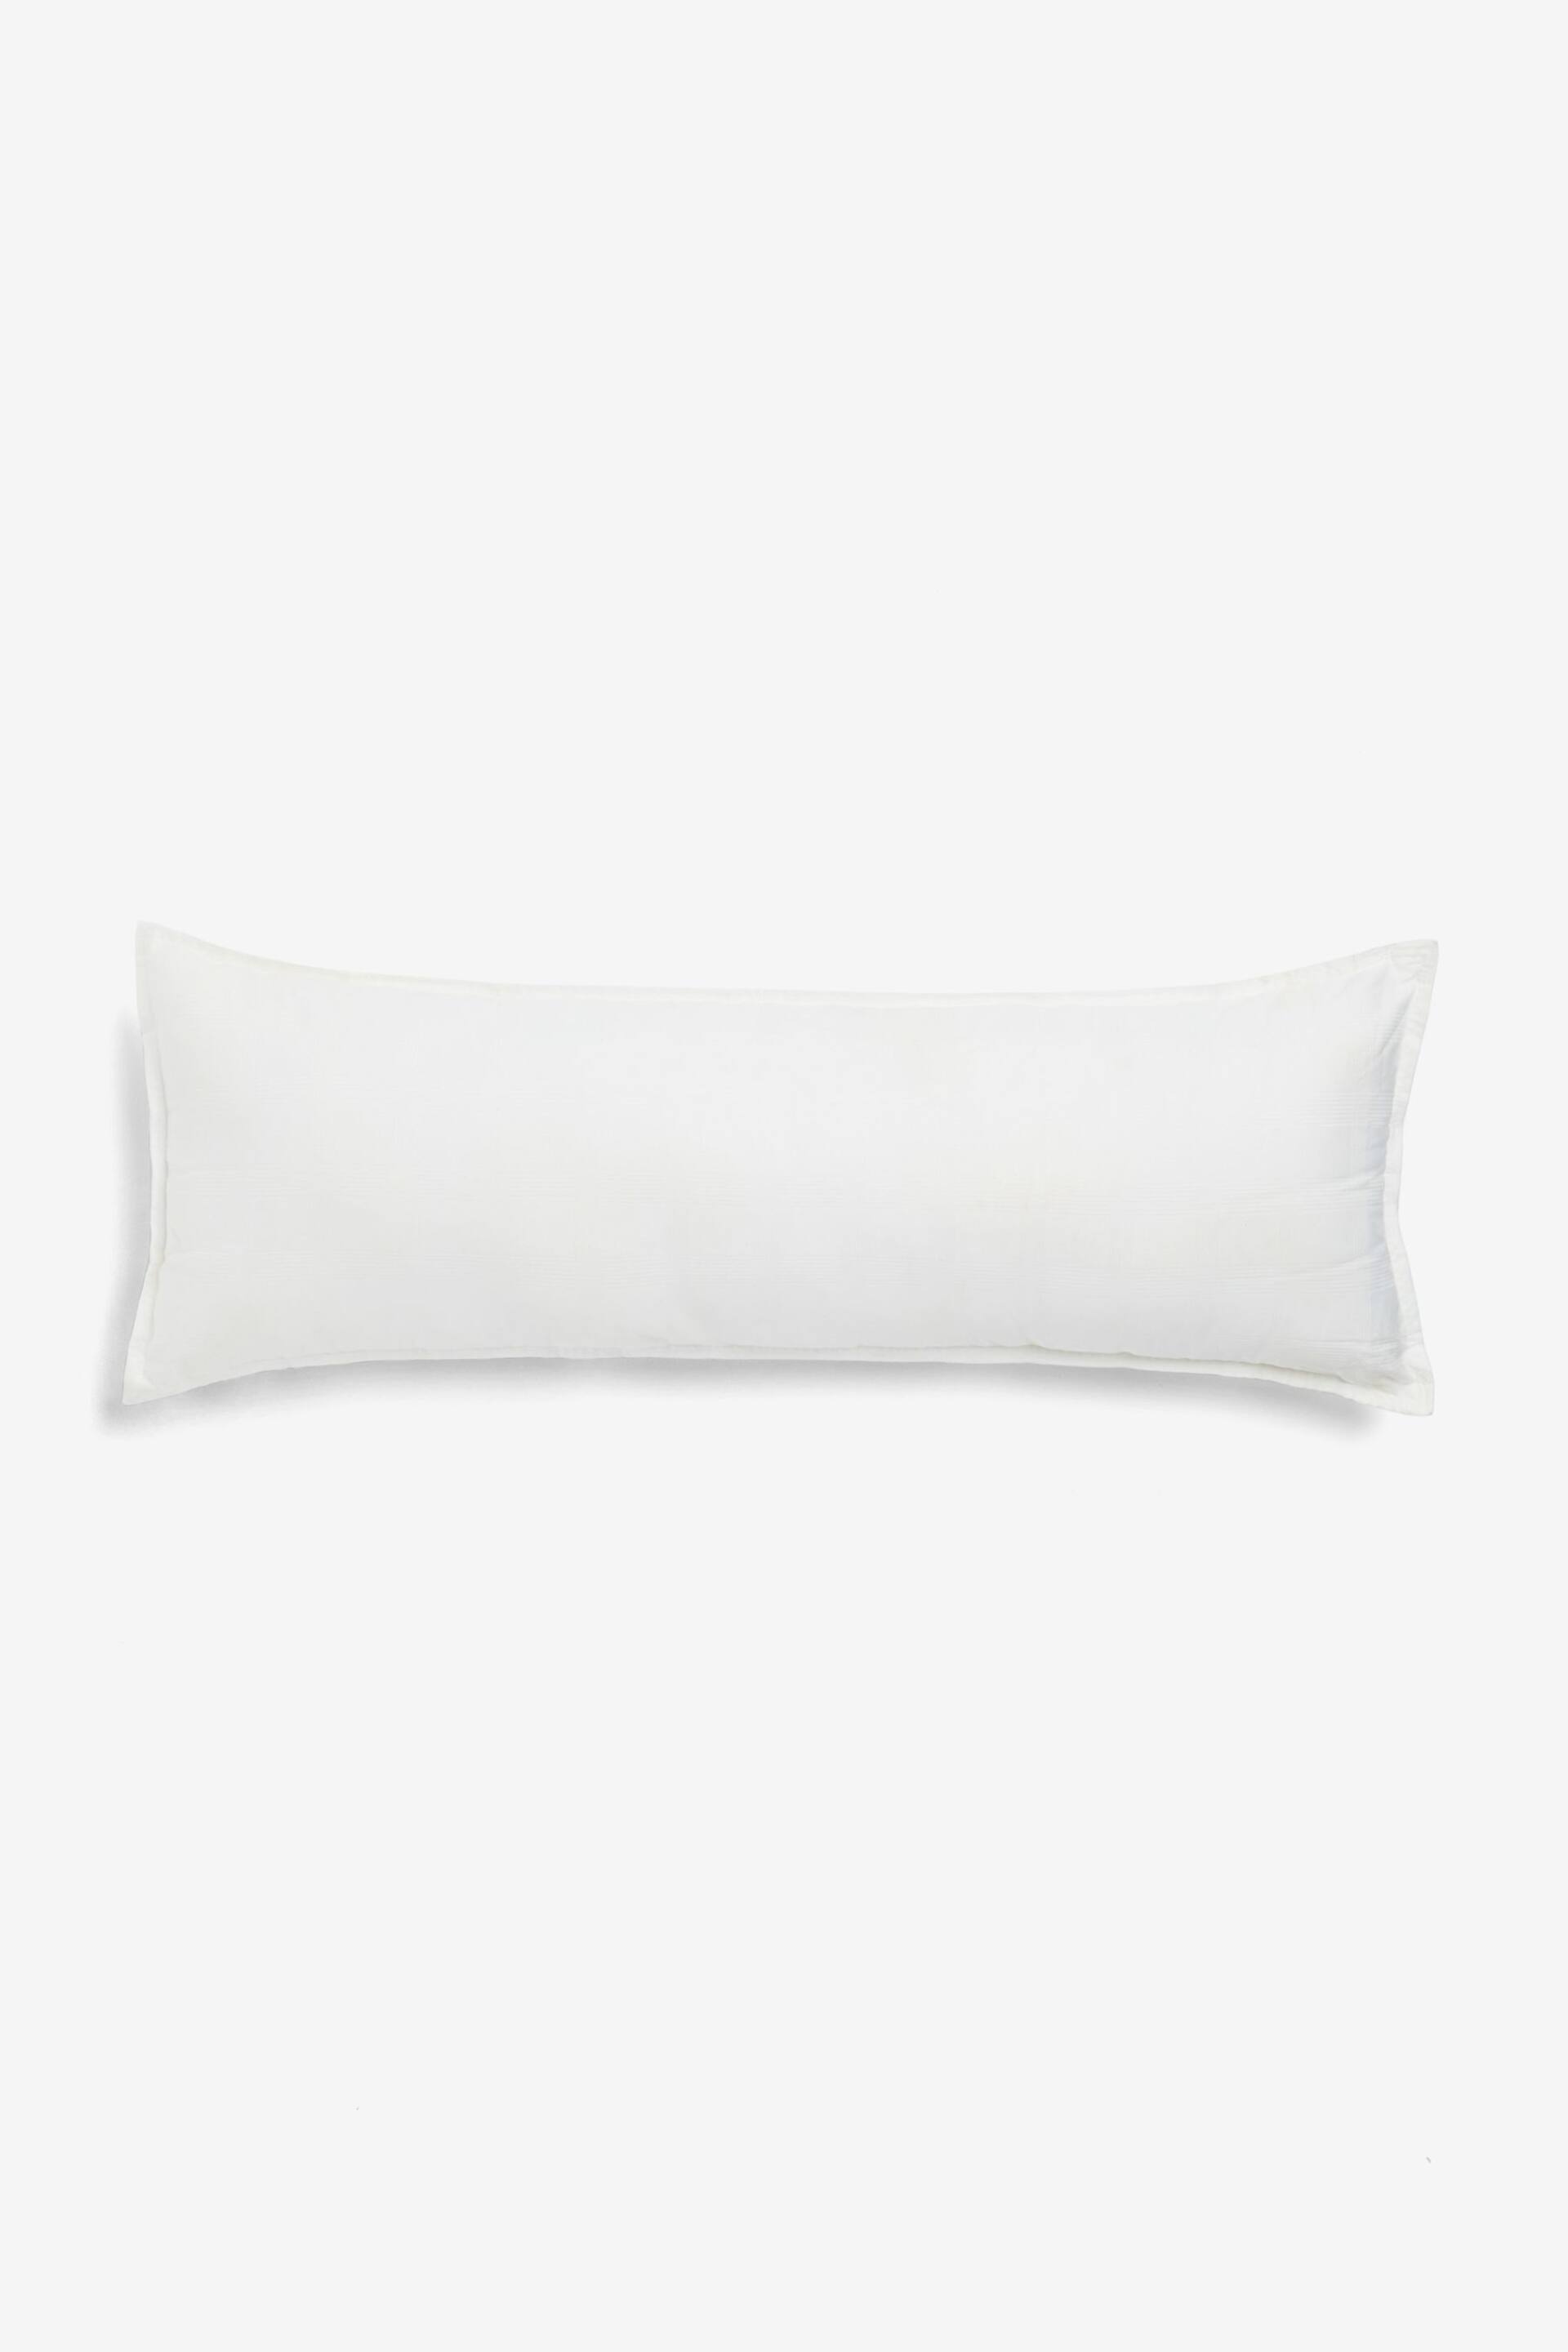 Small Bolster Feels Like Down Pillow - Image 2 of 2